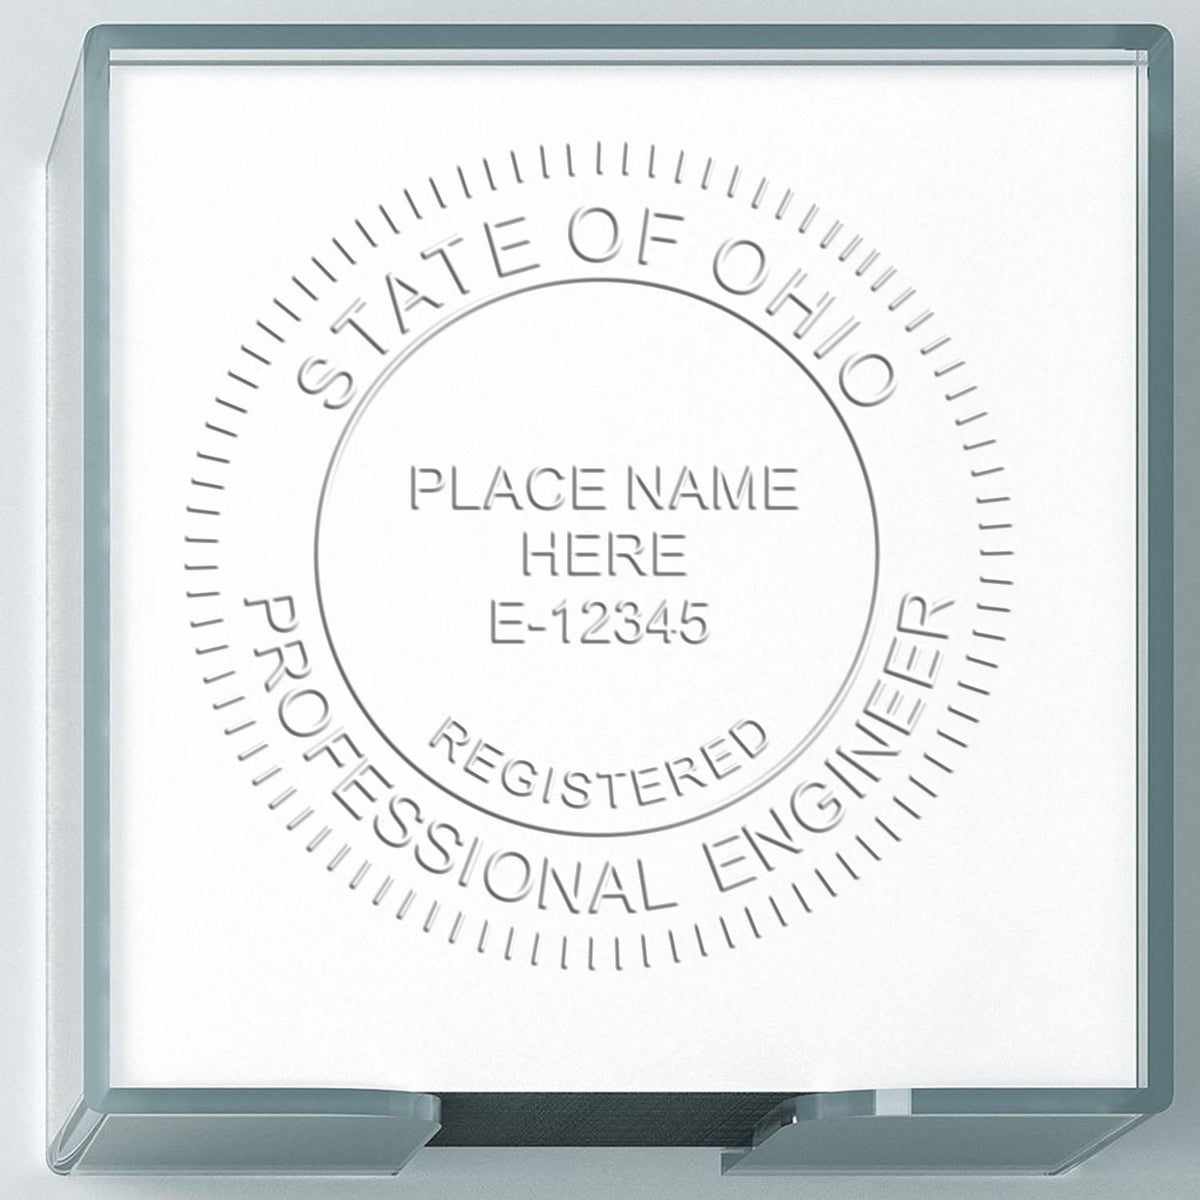 The Gift Ohio Engineer Seal stamp impression comes to life with a crisp, detailed image stamped on paper - showcasing true professional quality.